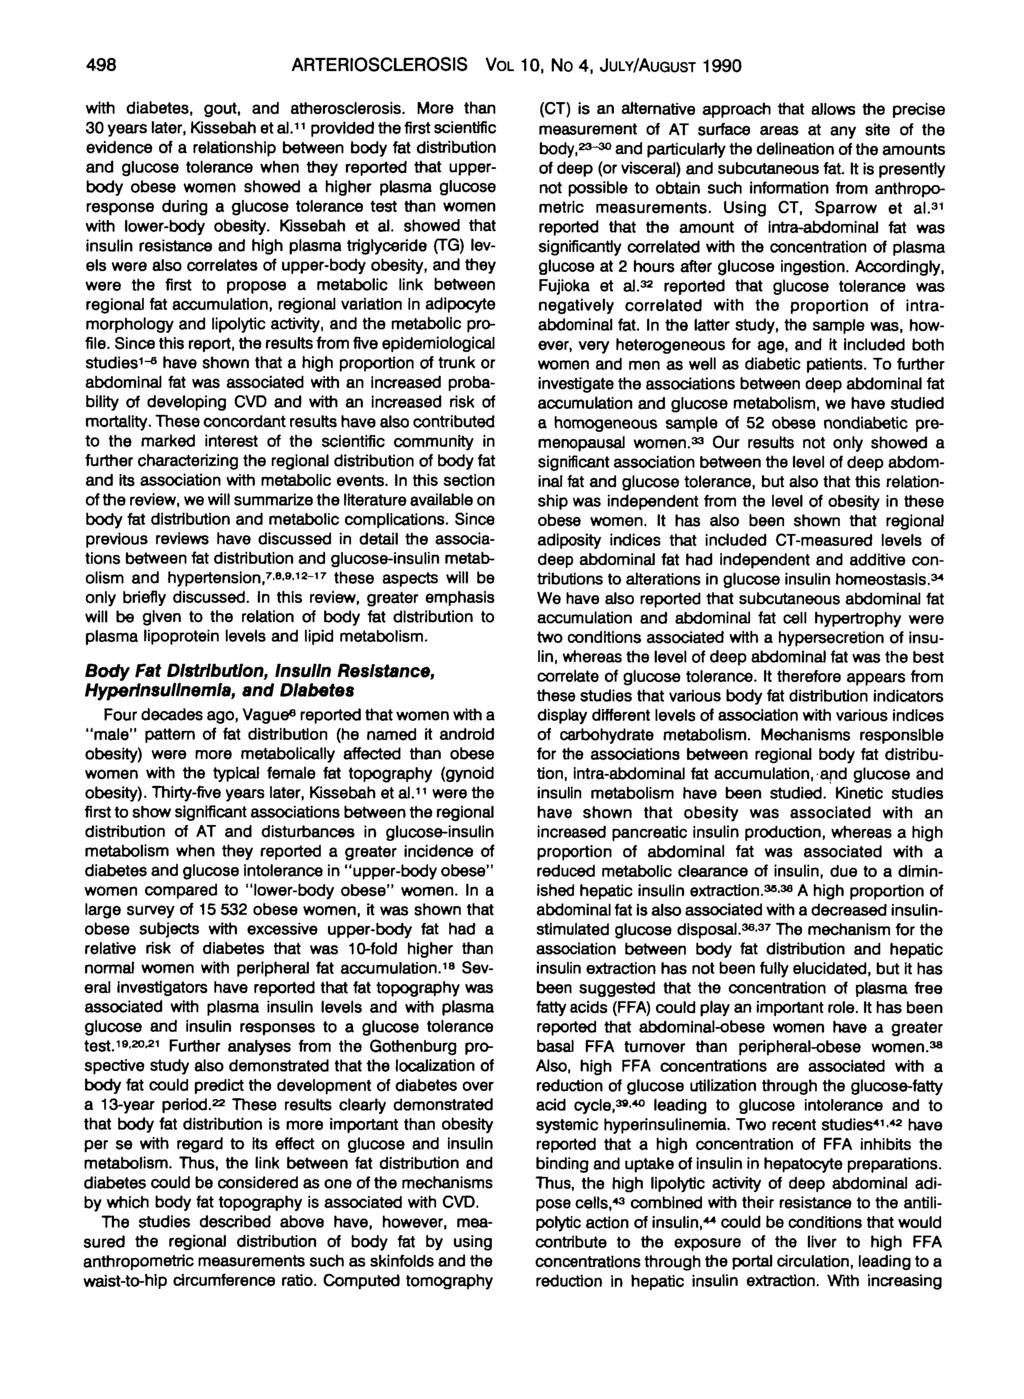 498 ARTERIOSCLEROSIS VOL 10, No 4, JULY/AUGUST 1990 with diabetes, gout, and atherosclerosis. More than 30 years later, Kissebah et al.